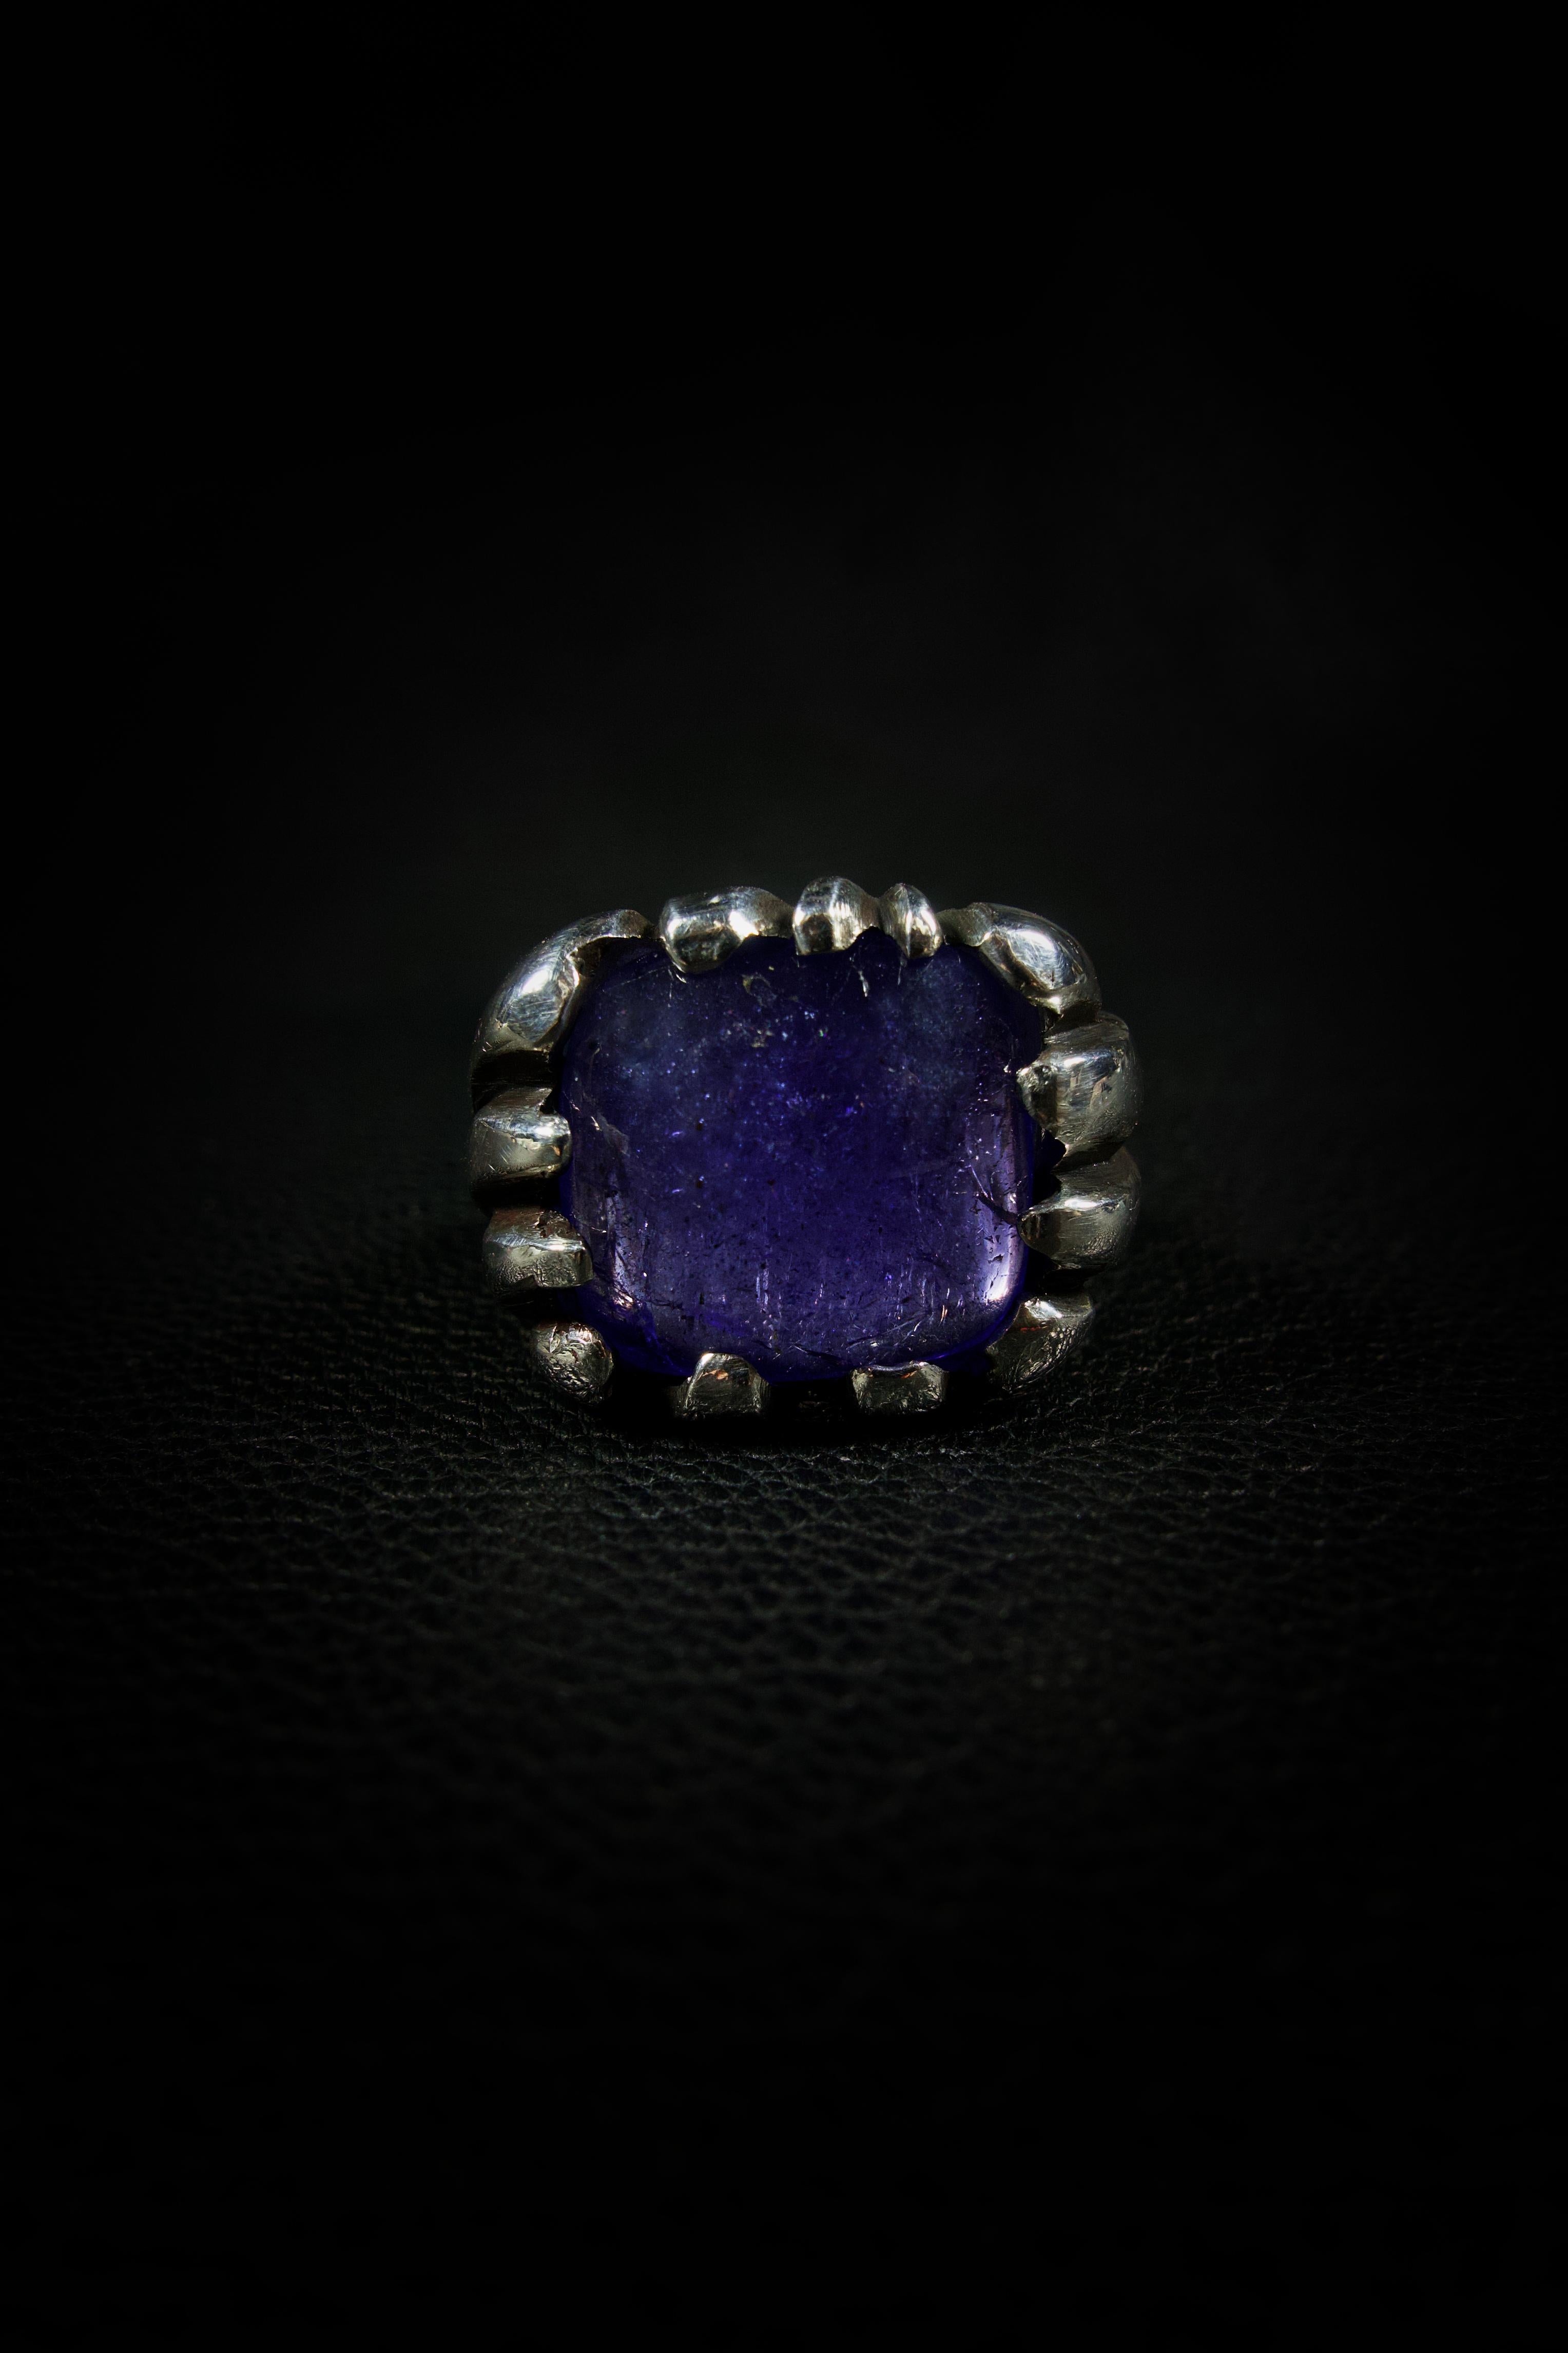 Rise is a one-of-a-kind handmade ring by Ken Fury that is hand-carved and cast in sterling silver.

Stone: Natural Tanzanite

Stone size: 11mm x 10mm

Ring size: 9